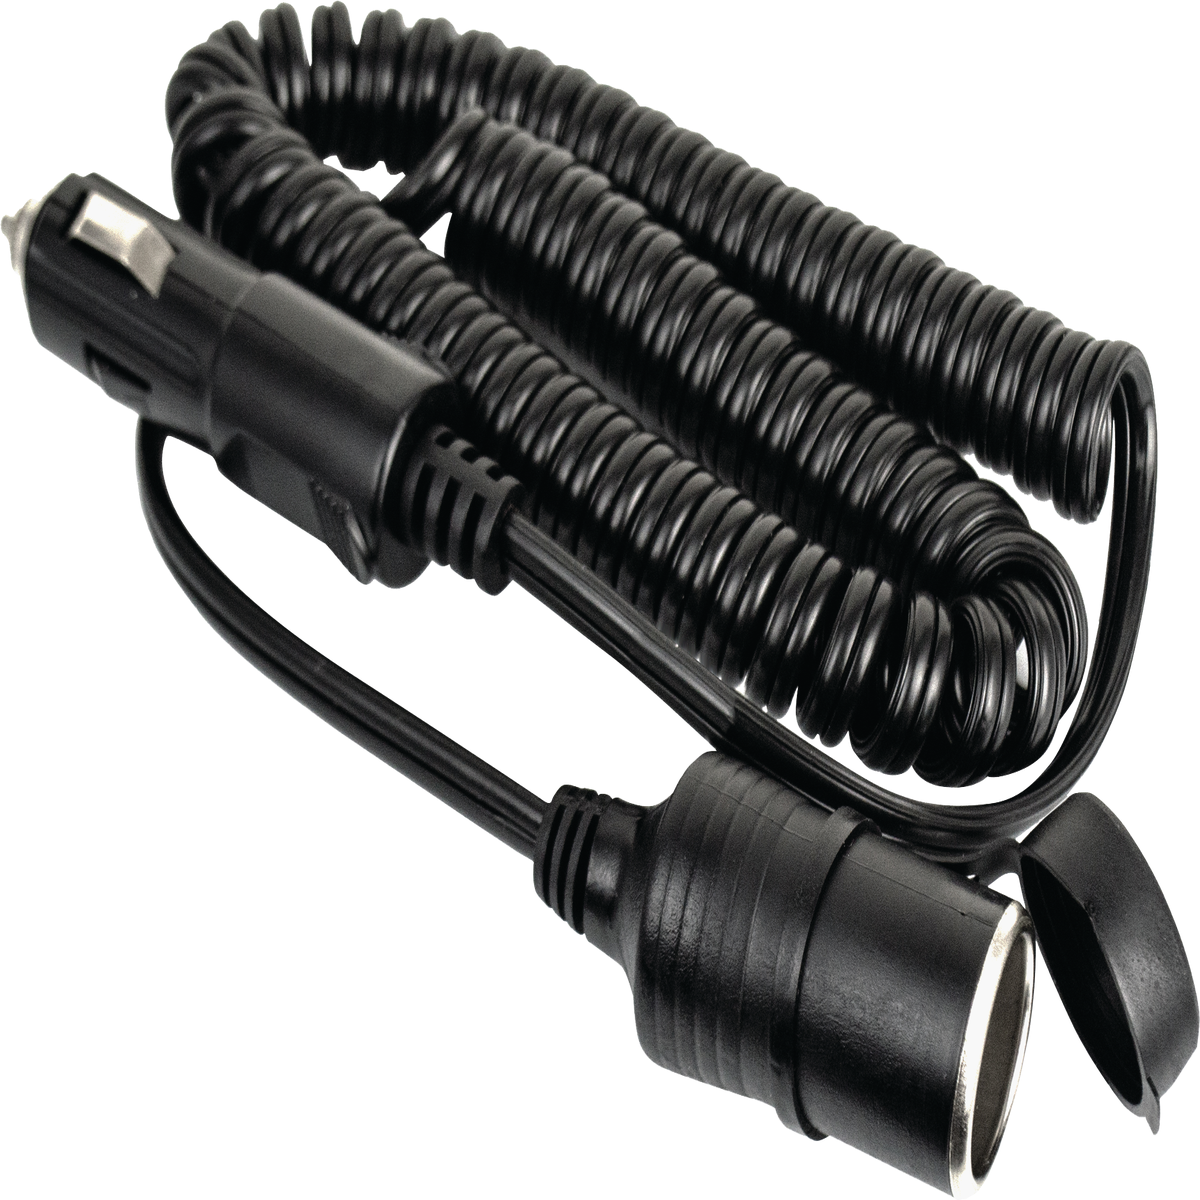 Lighter Extension Cord